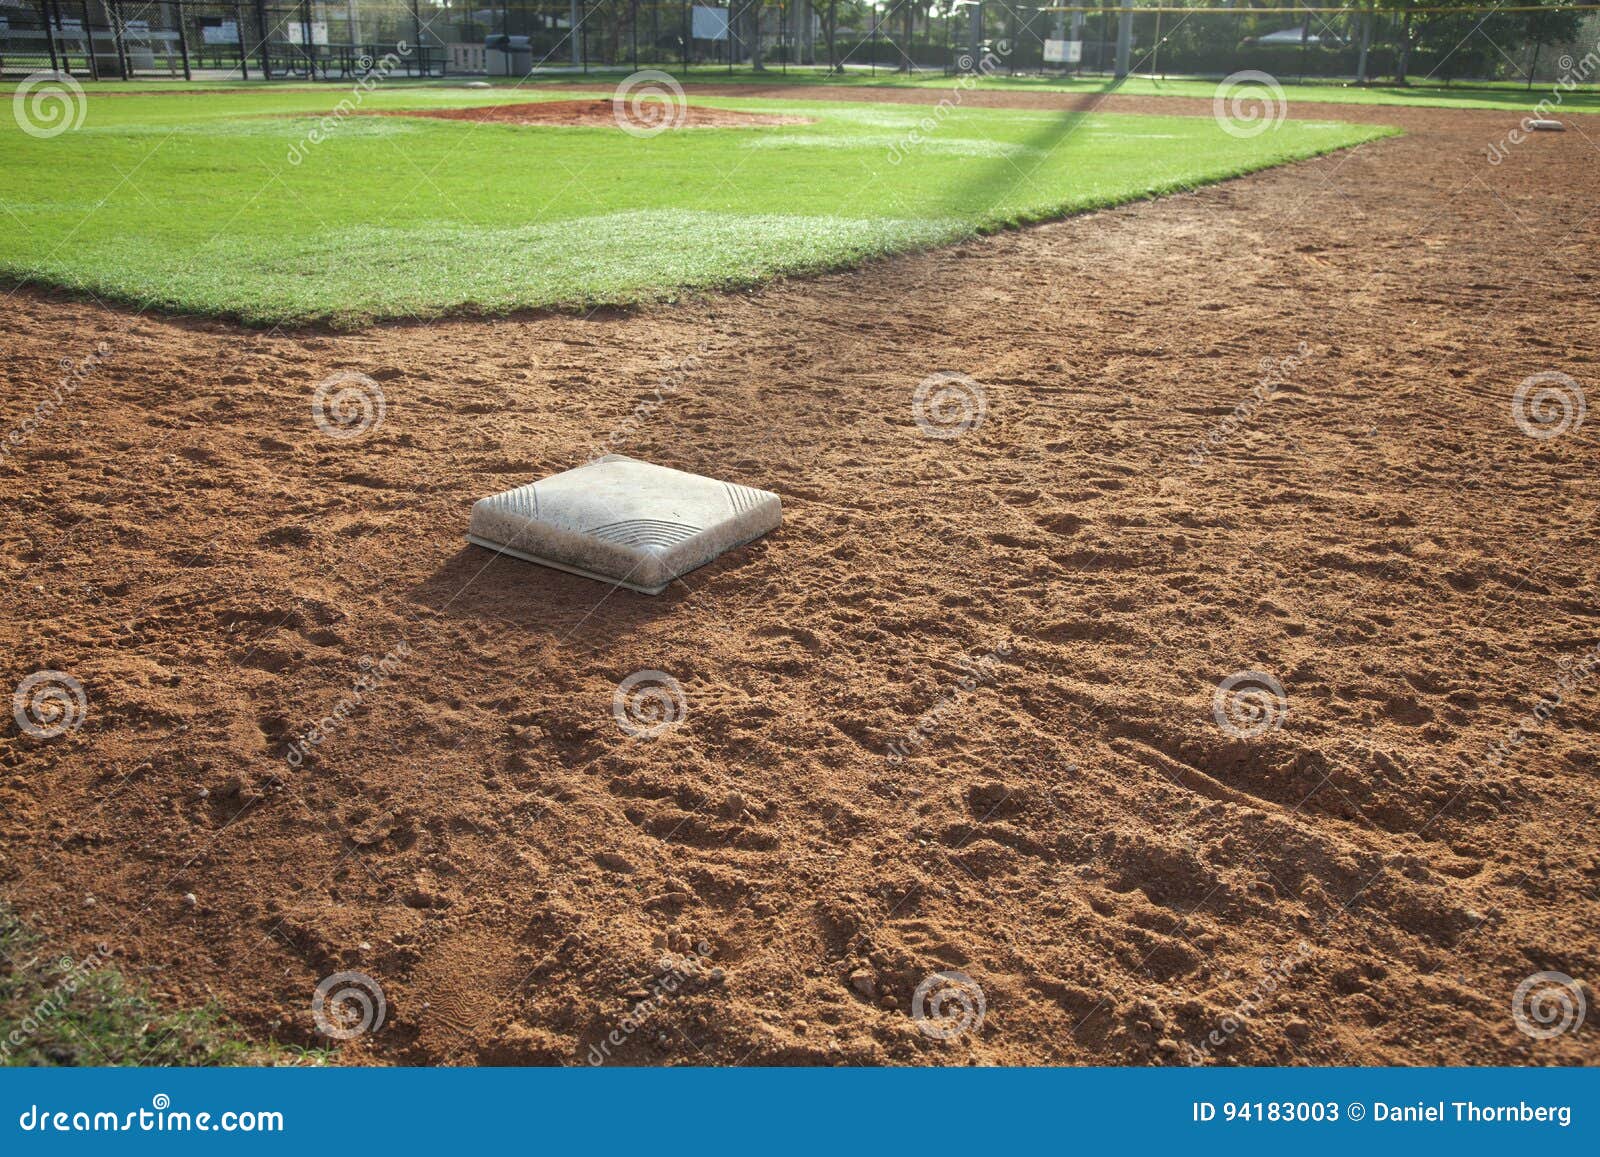 baseball field infield with first base in the foreground